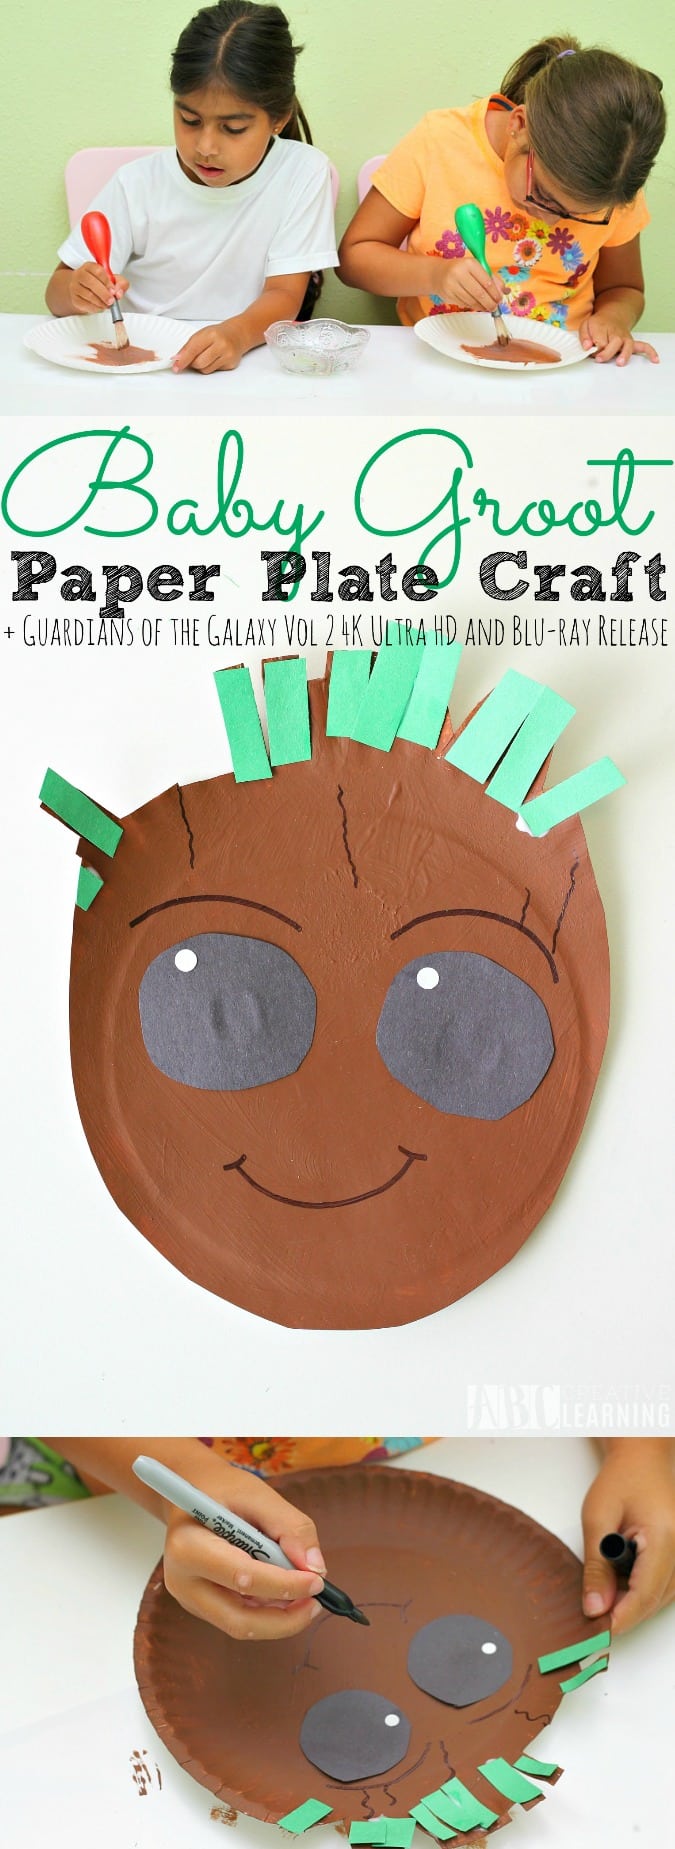 Paper Plate Baby Groot Craft + Guardians of the Galaxy Vol 2 4K Ultra HD™ and Blu-ray Release - abccreativelearning.com